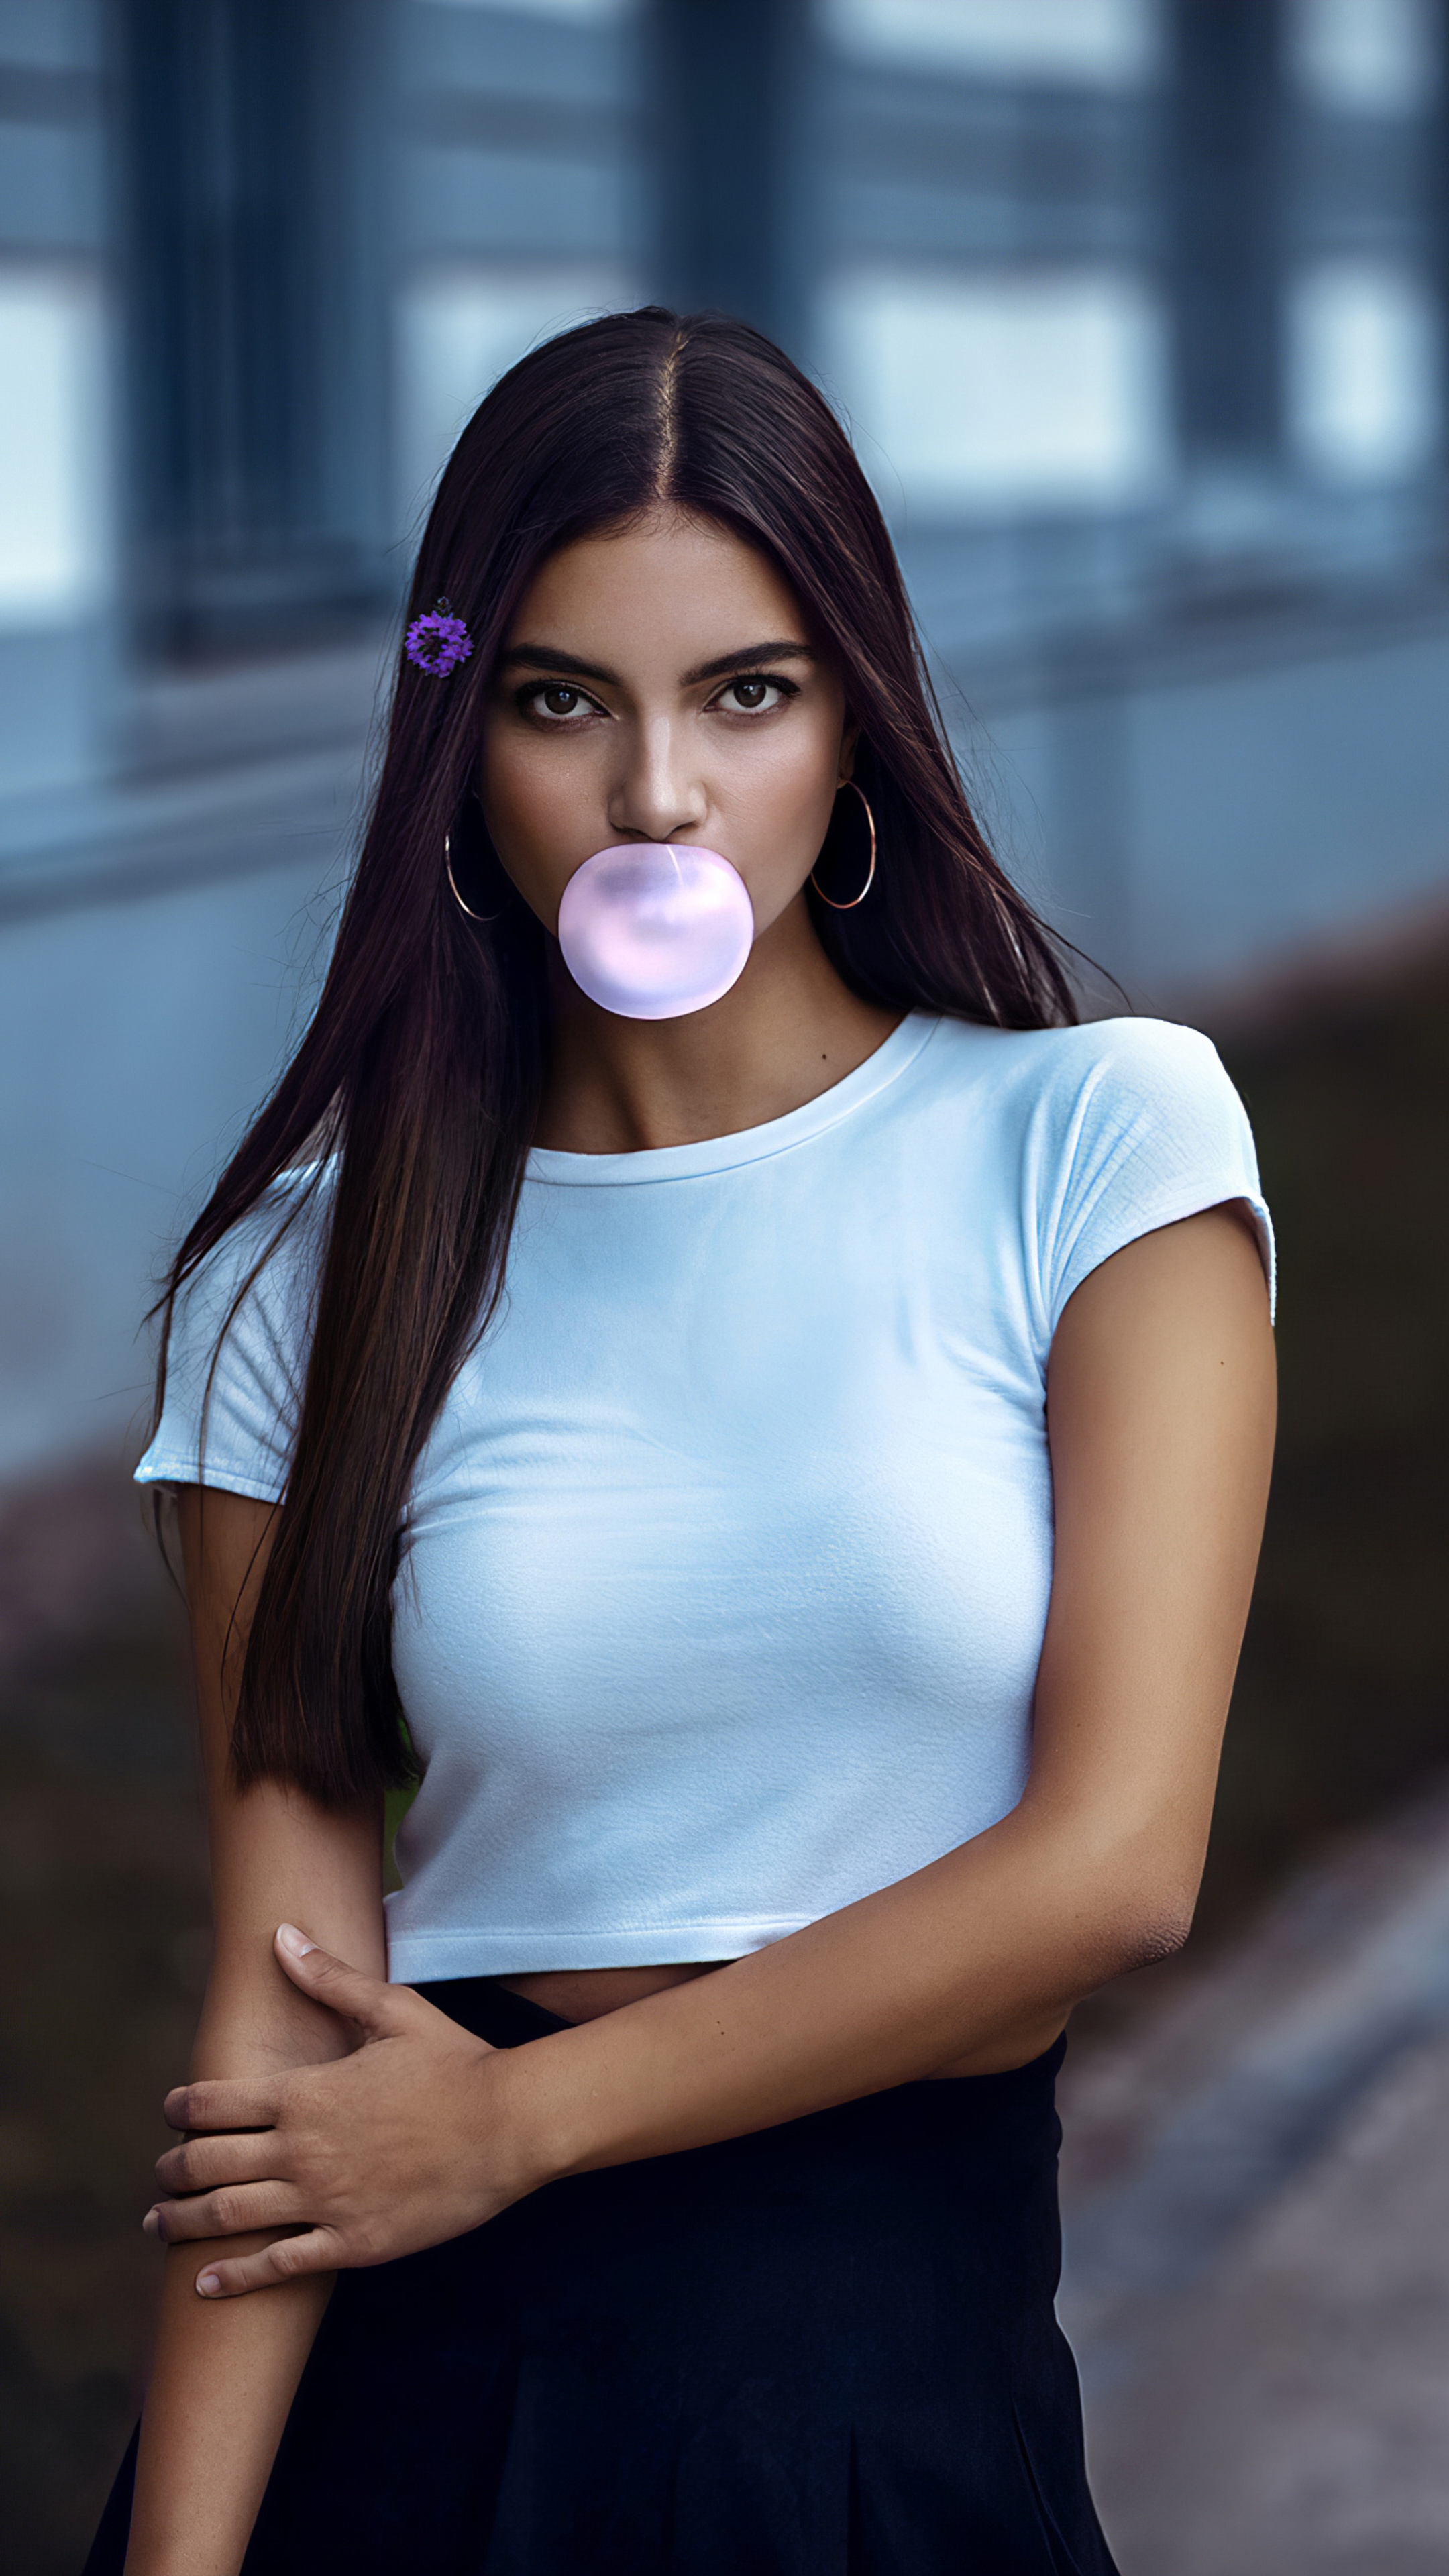 Young girl blowing bubble gum, Innocent and playful, Bubble-blowing delight, Carefree enjoyment, 2160x3840 4K Phone